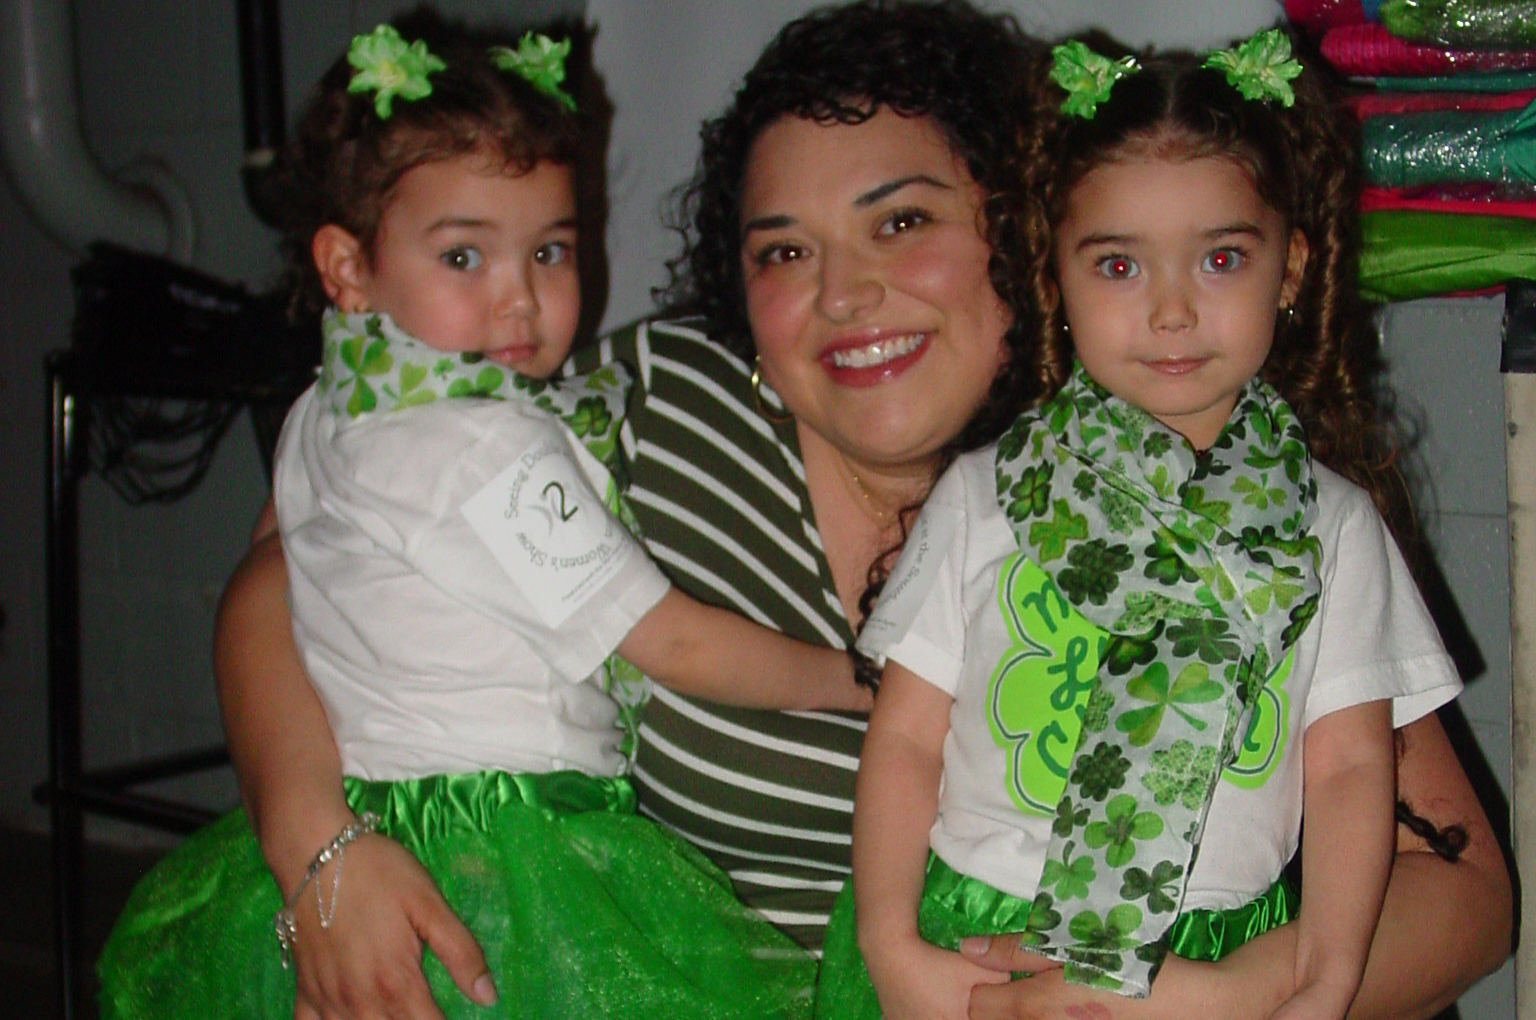 Mom holding her twin toddler girls, who are wearing green tutus